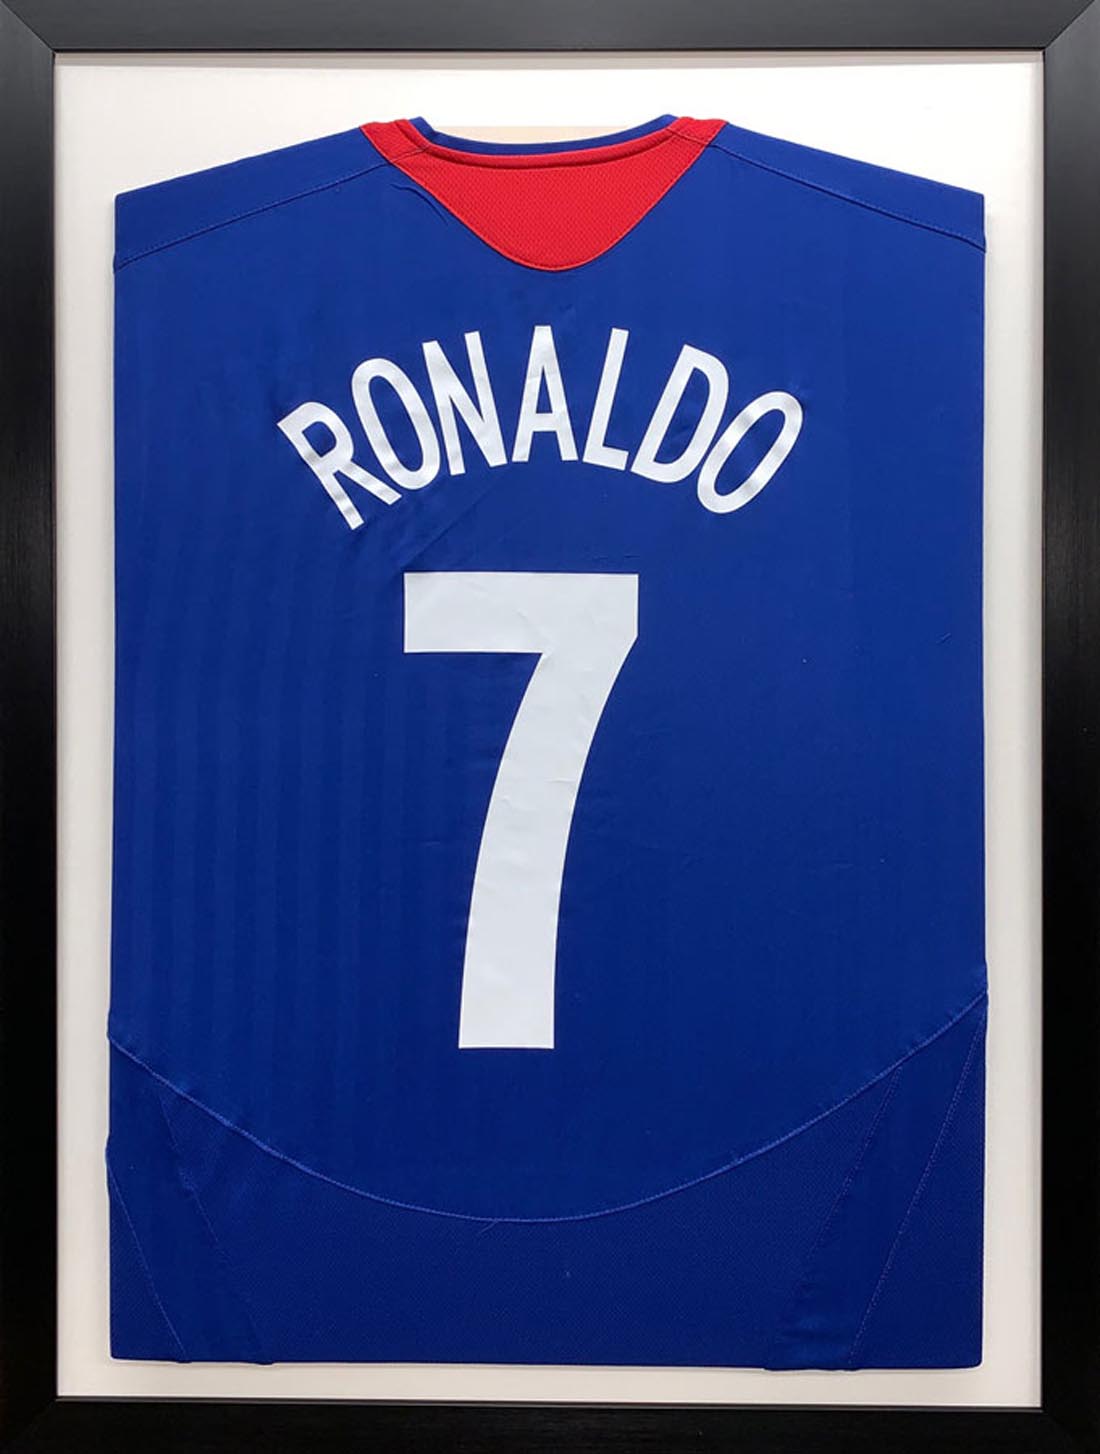 What is the best size football shirt for framing? 